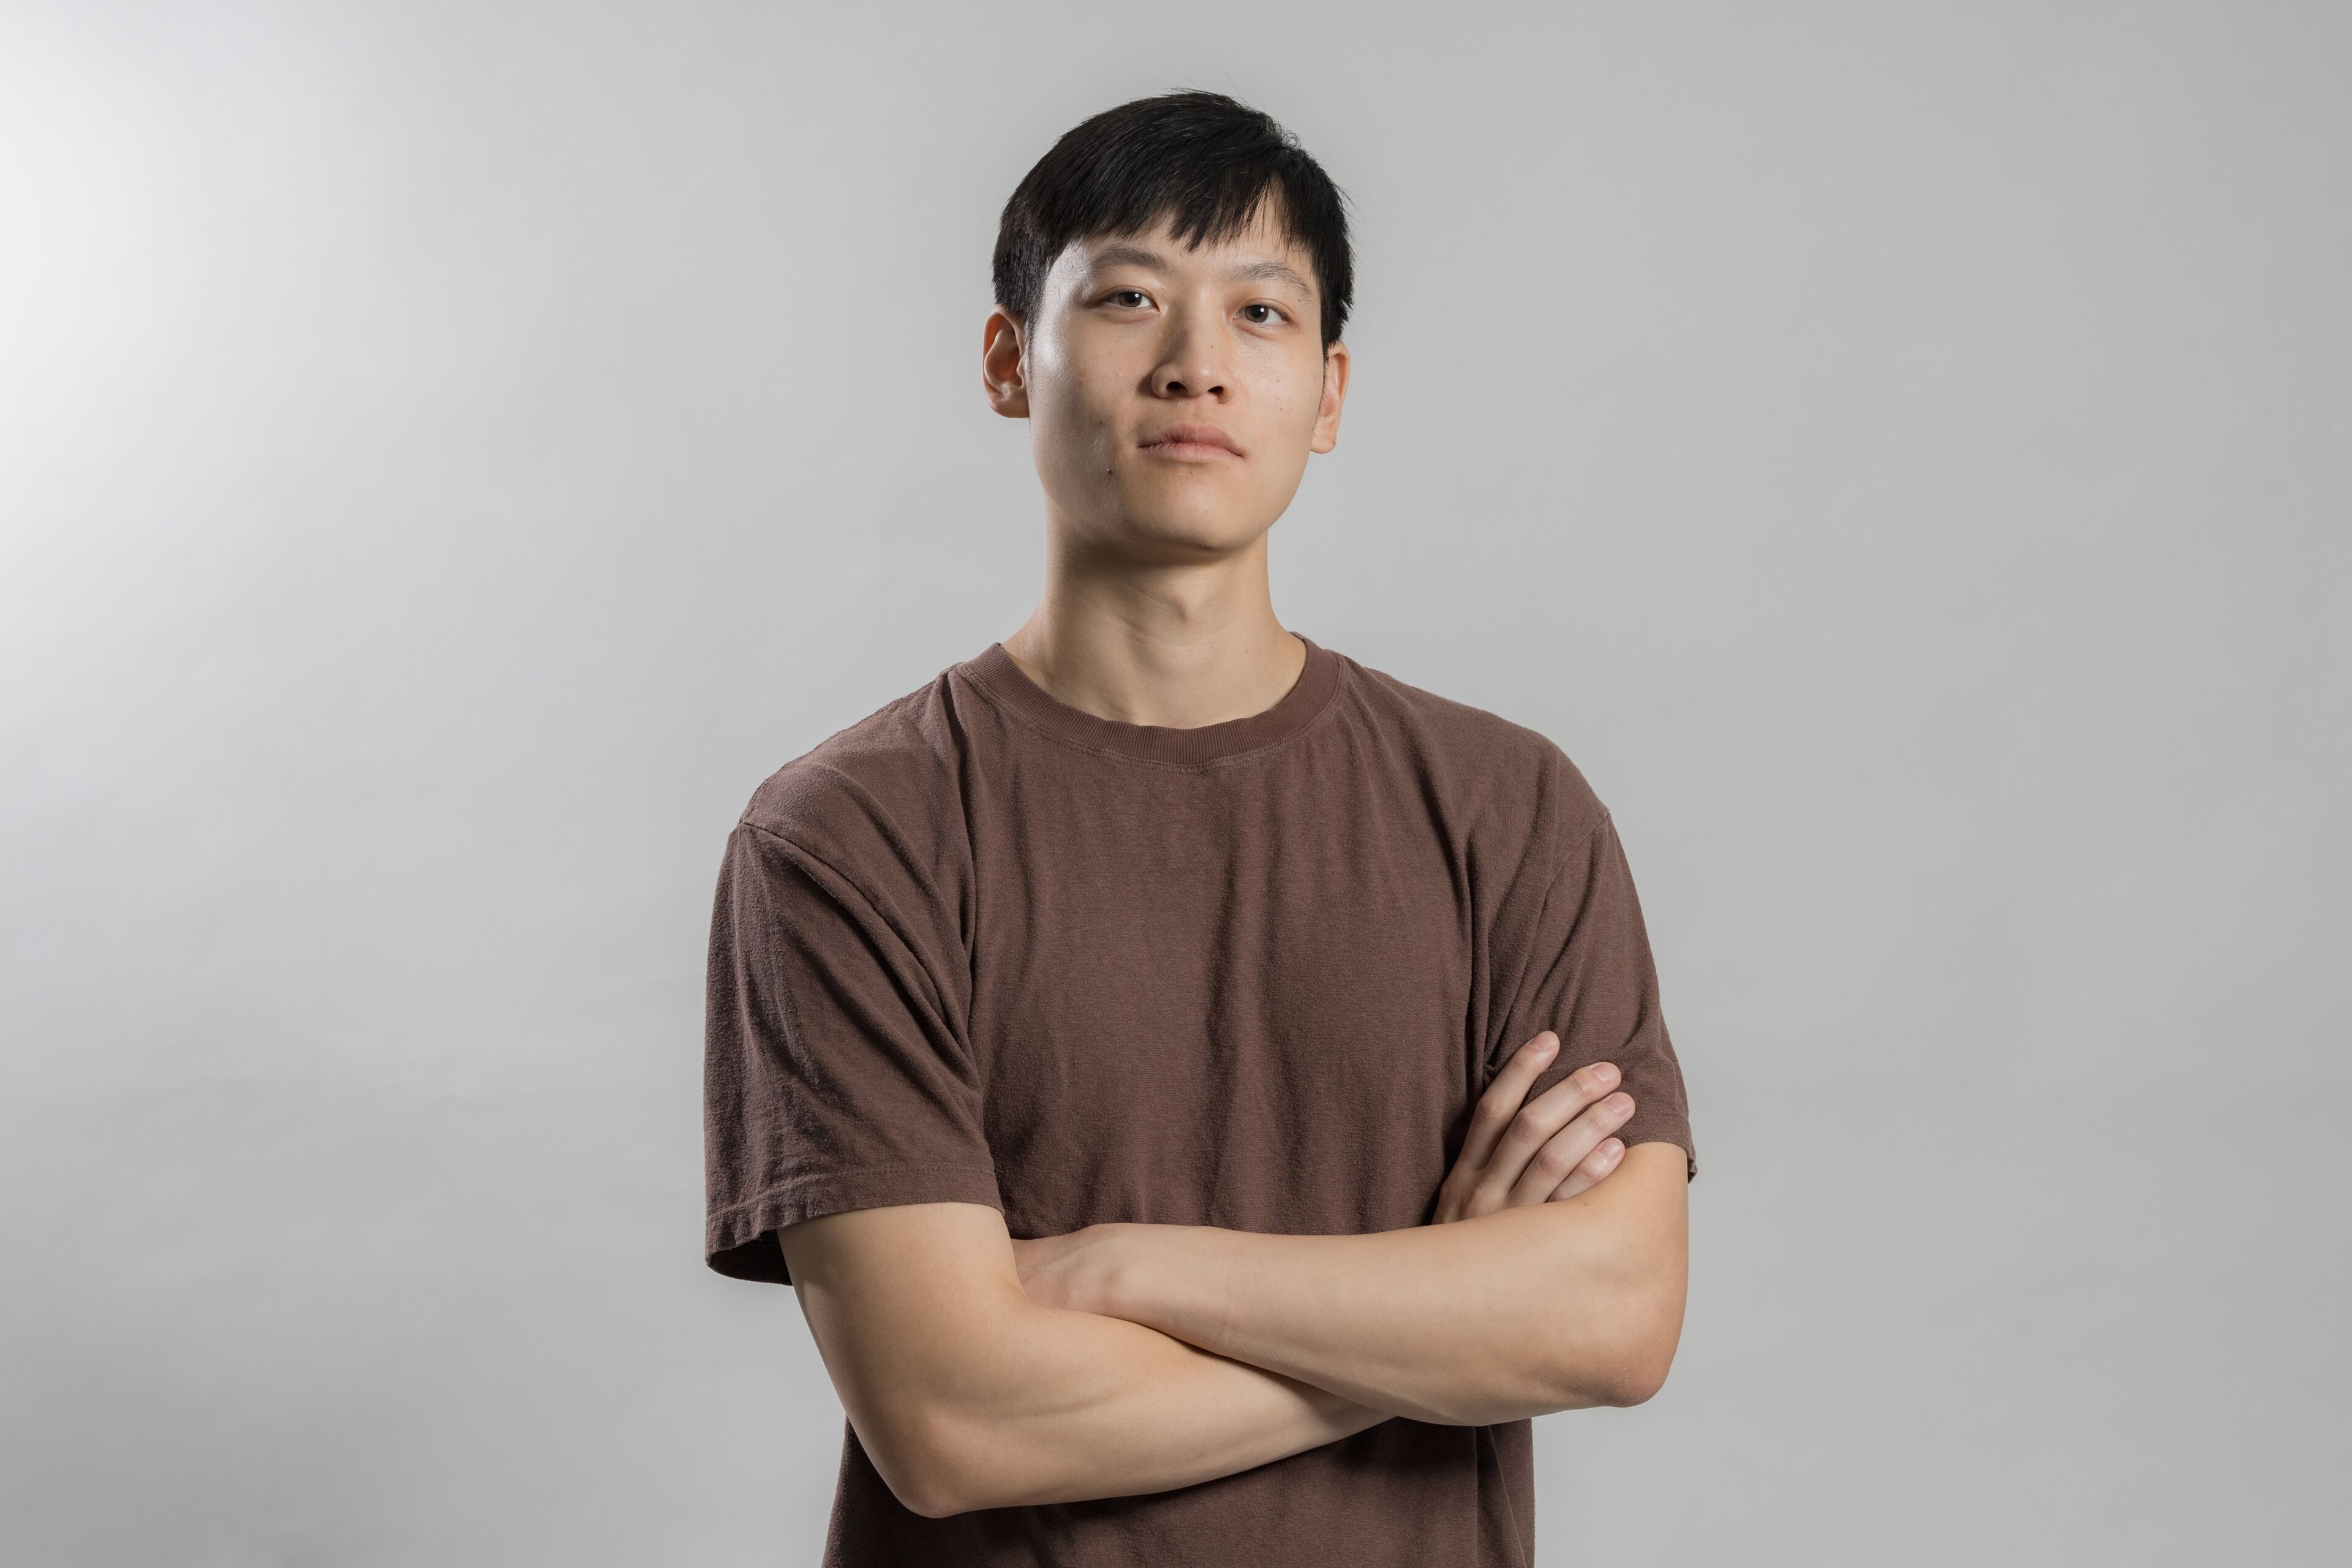 A young adult male stands with arms crossed, exuding confidence, against a neutral grey background.